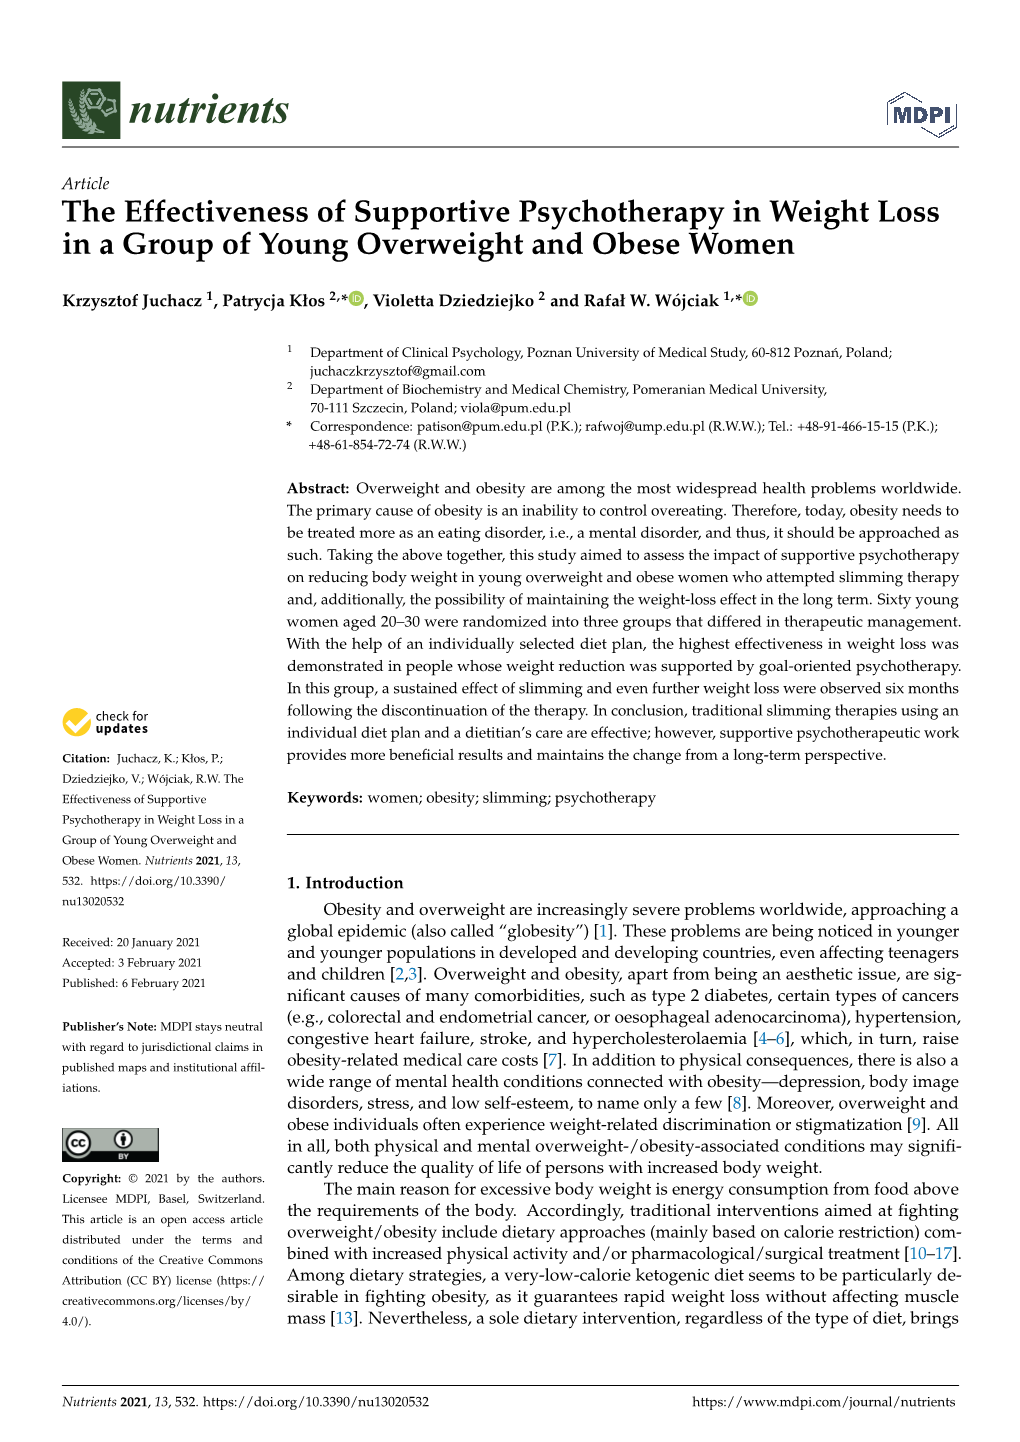 The Effectiveness of Supportive Psychotherapy in Weight Loss in a Group of Young Overweight and Obese Women